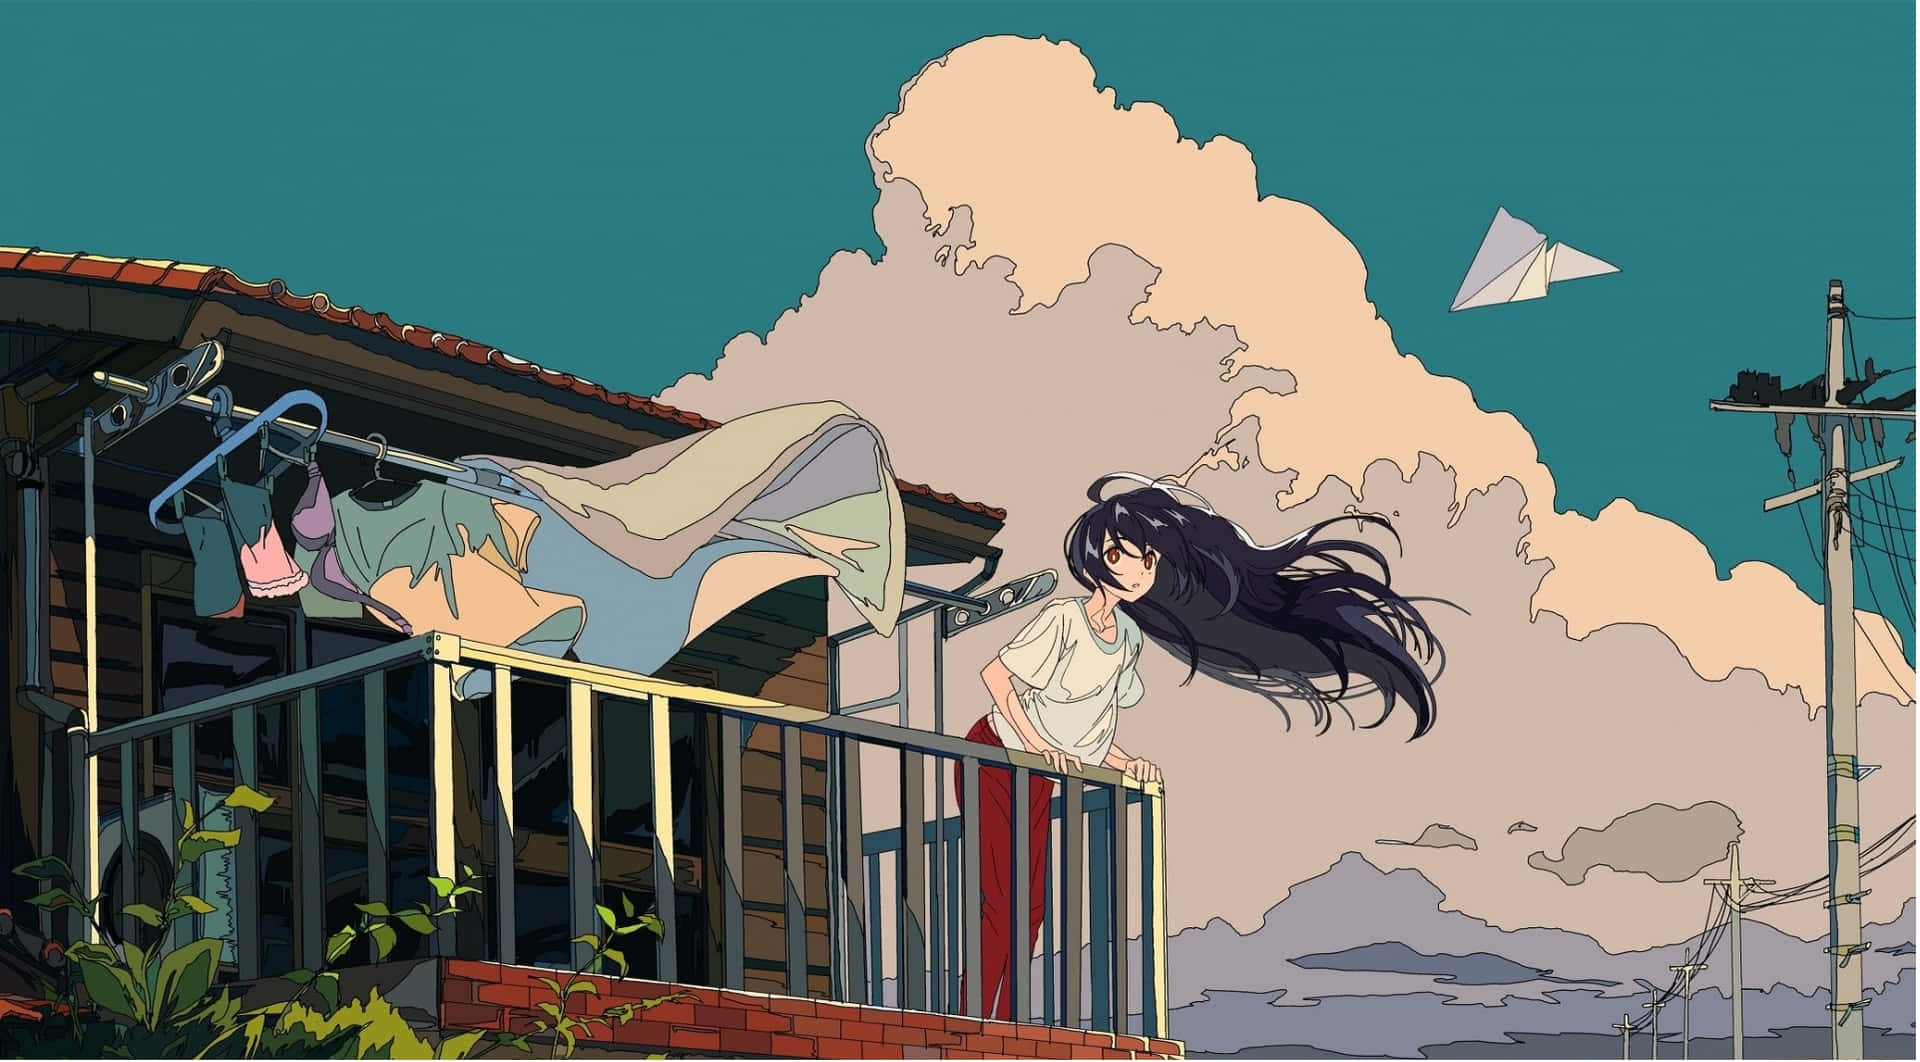 A whimsical anime aesthetic wallpaper of two characters in a vibrant sunset.